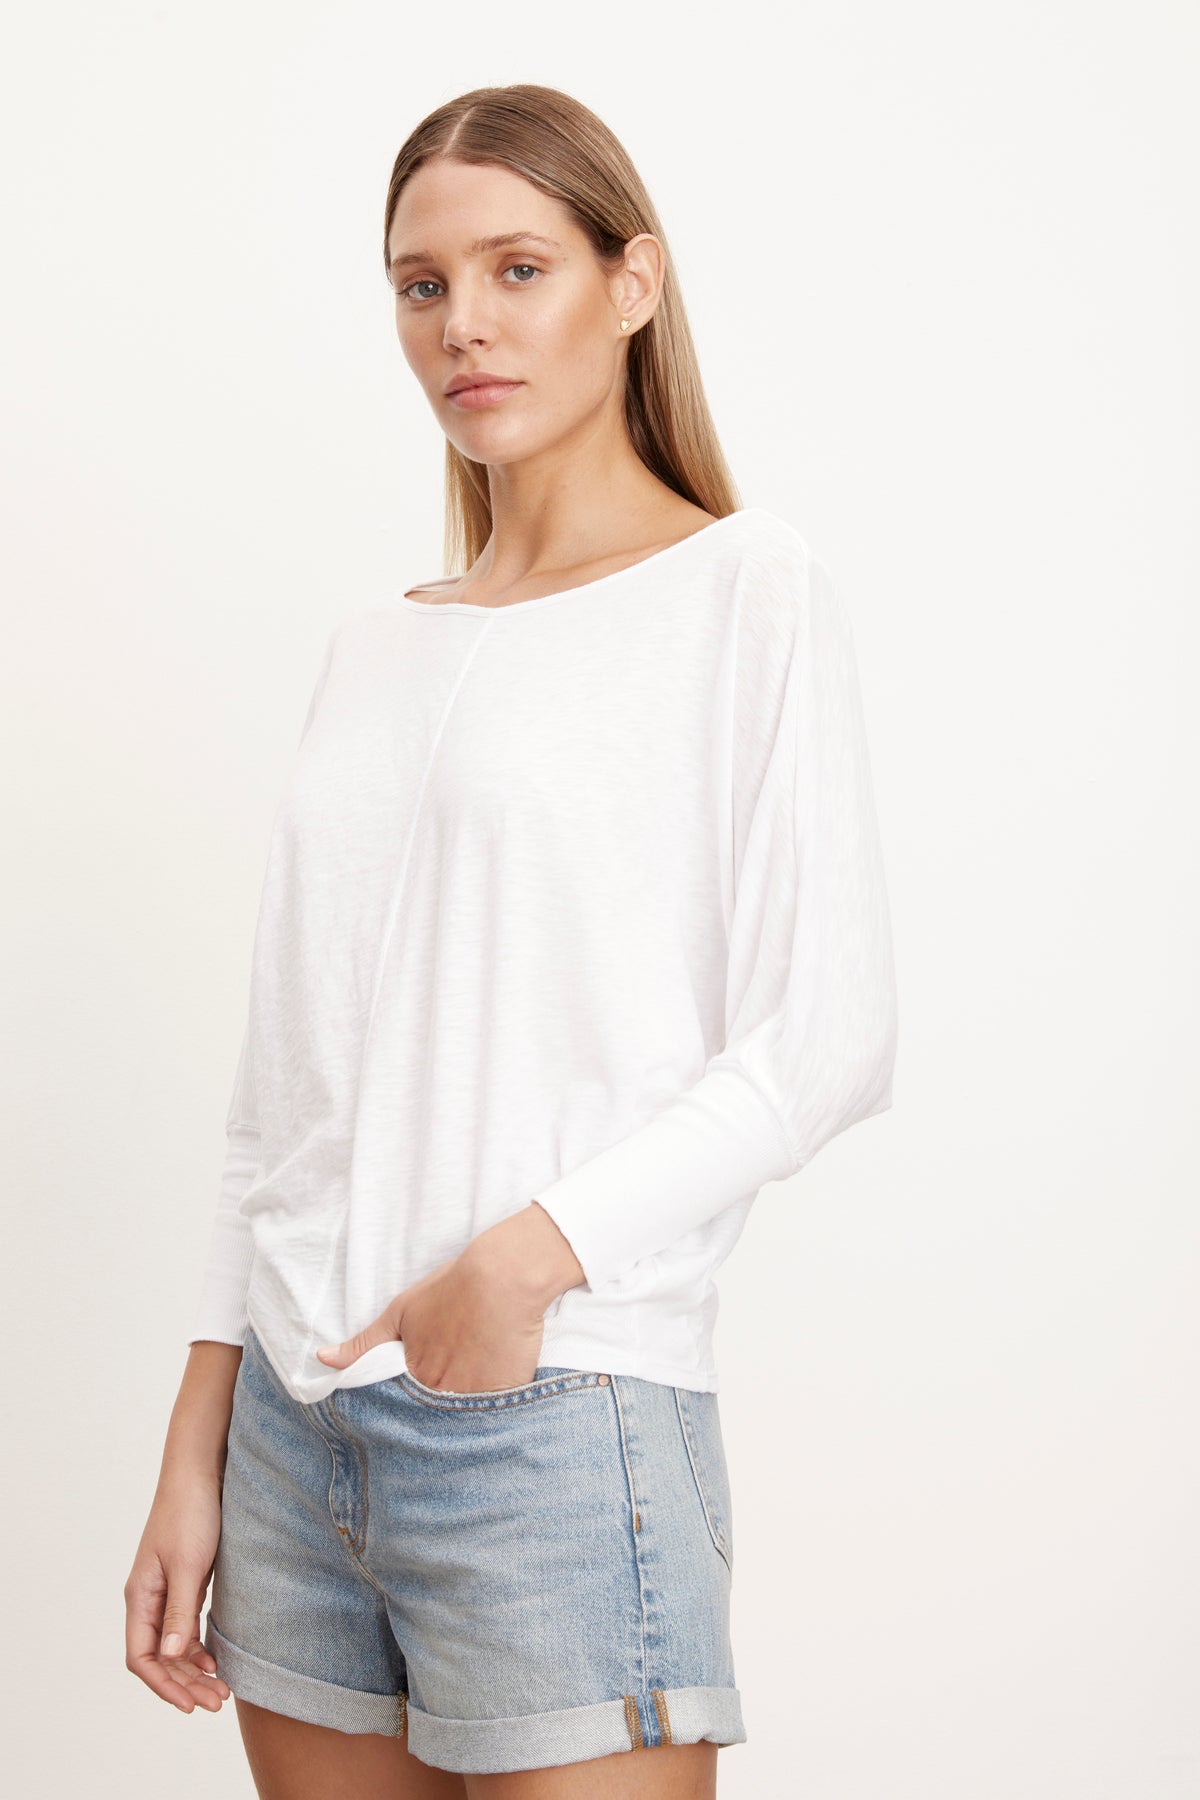 Woman wearing Joss Tee in white with dolman sleeve and denim shorts, hand in front shorts pocket, 3/4 view-26423852040385